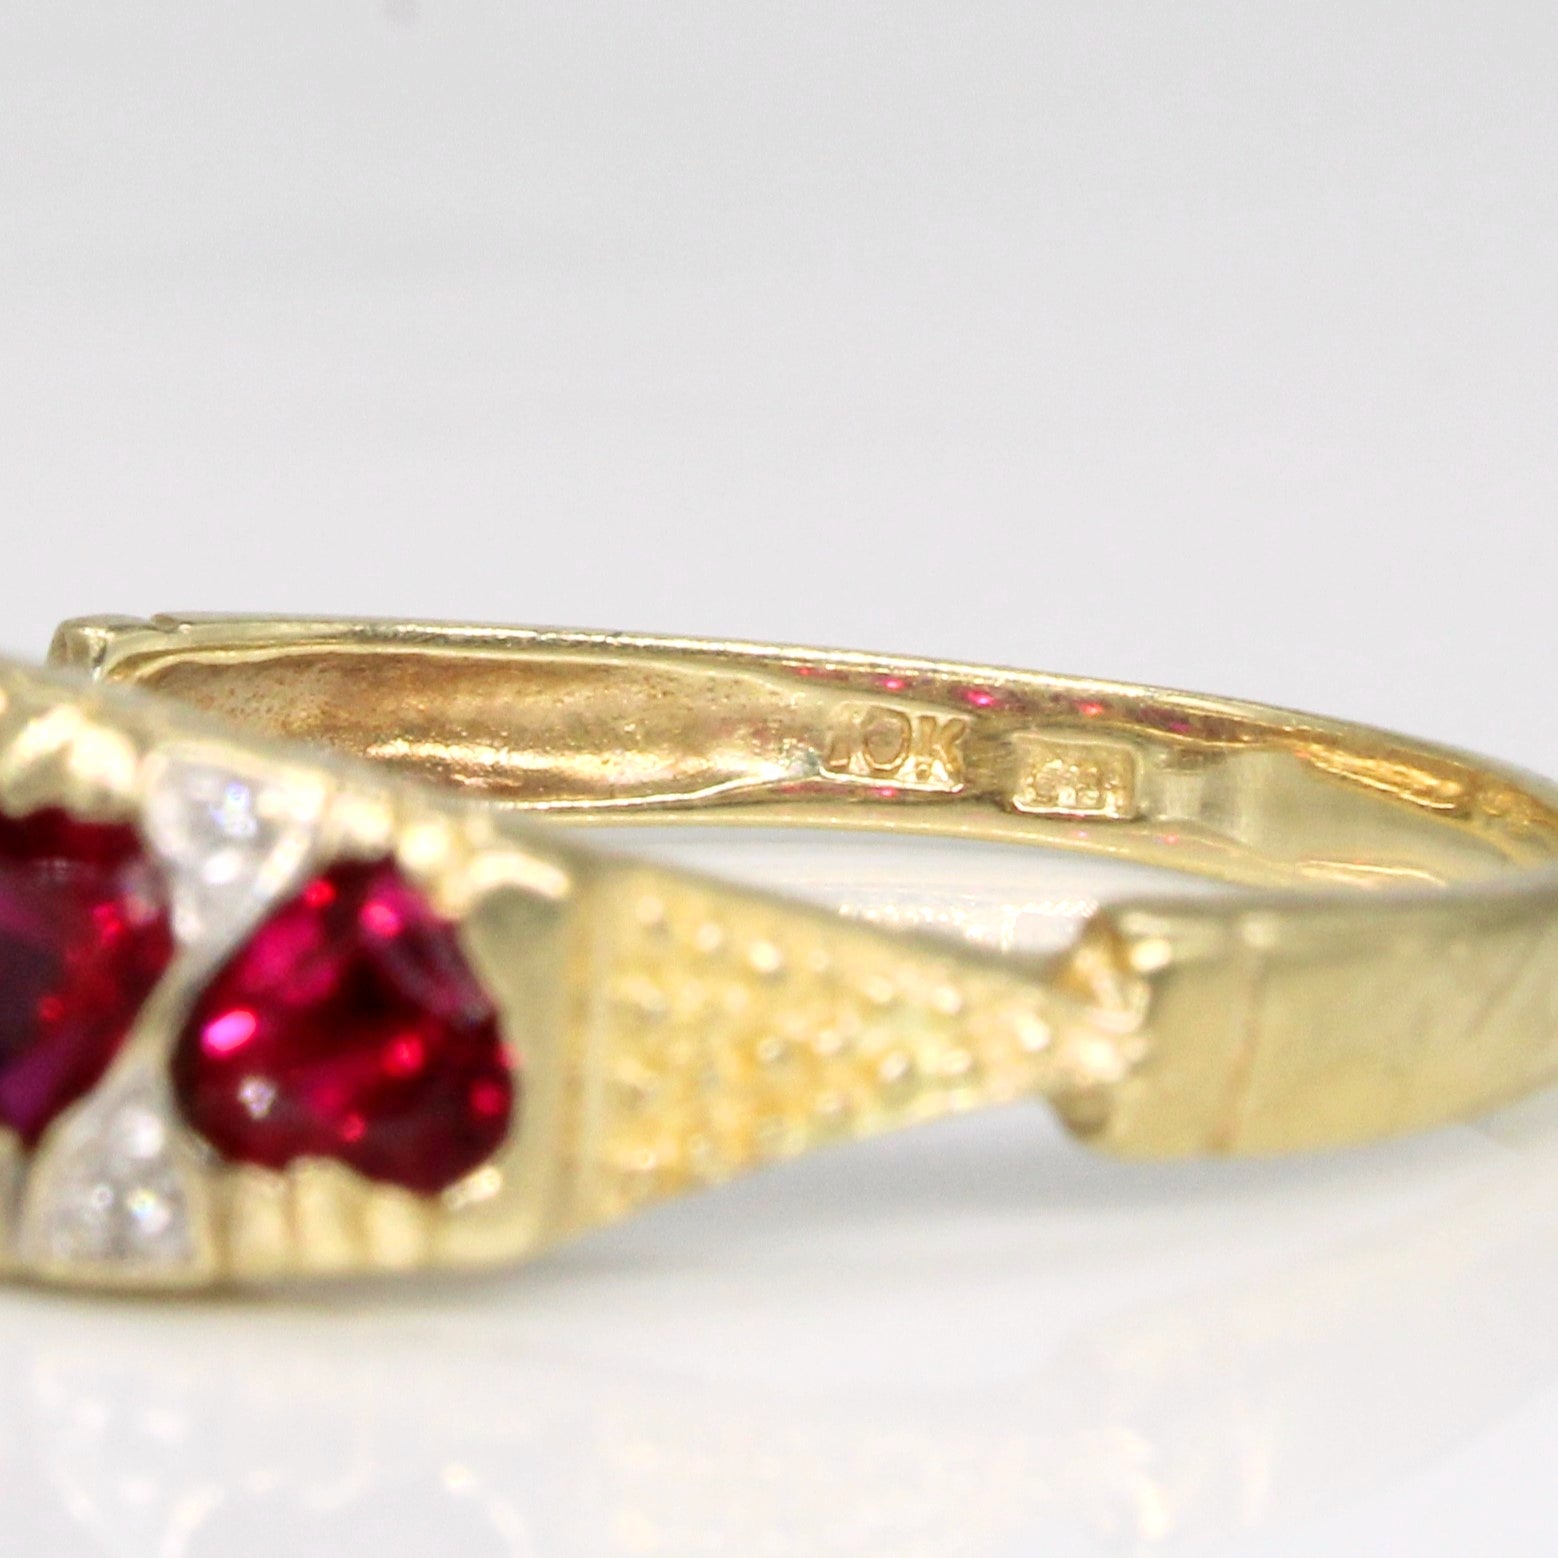 Heart Cut Synthetic Ruby & Natural Diamond Ring | 1.00ctw, 0.008ctw | SZ 8.5 |